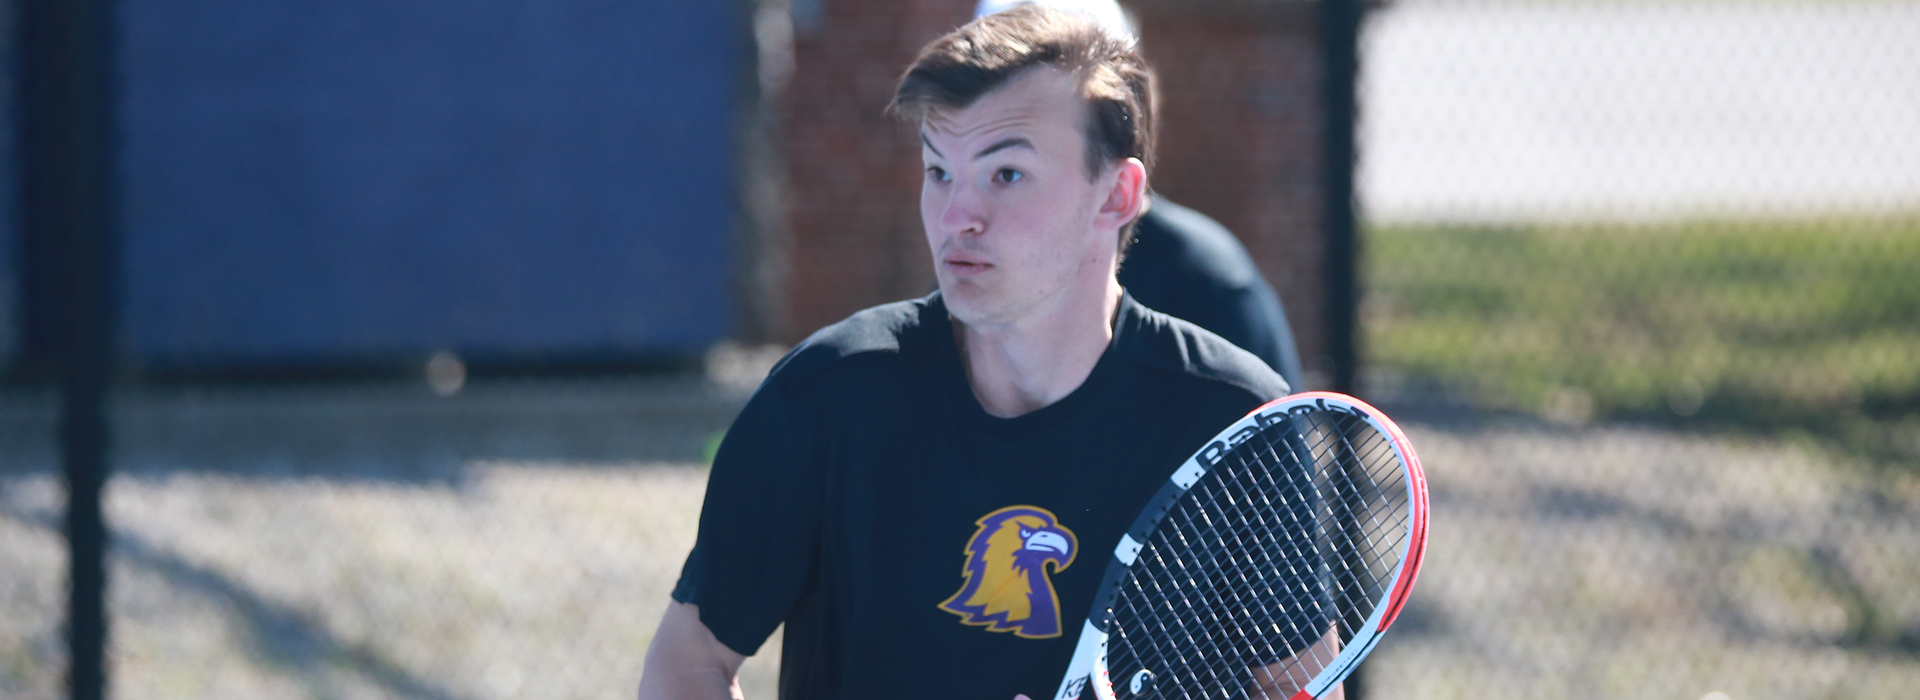 Tech tennis falls in road match at in-state rival Lipscomb